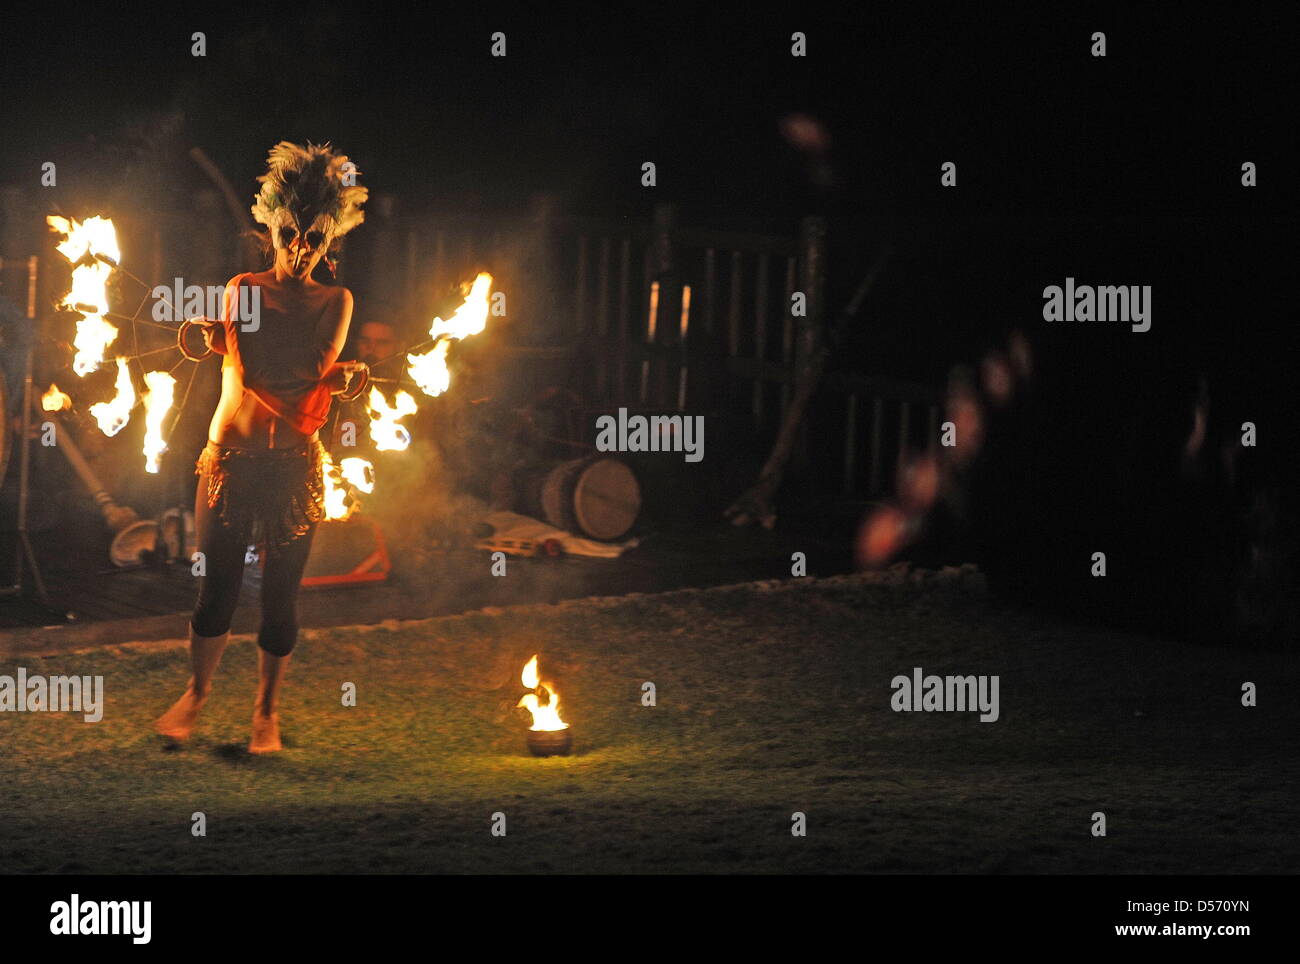 Paarl, South Africa. 24th March, 2013. A fire dancer performs during the Earth hour picnic at the Afrikaanse Taalmonument on March 24, 2013. Earth Hour is an annual worldwide event to help raise awareness about the need to take action on environmental issues. Credit: Lulama Zenzile/Foto24/Gallo Images/ Alamy Live News Stock Photo